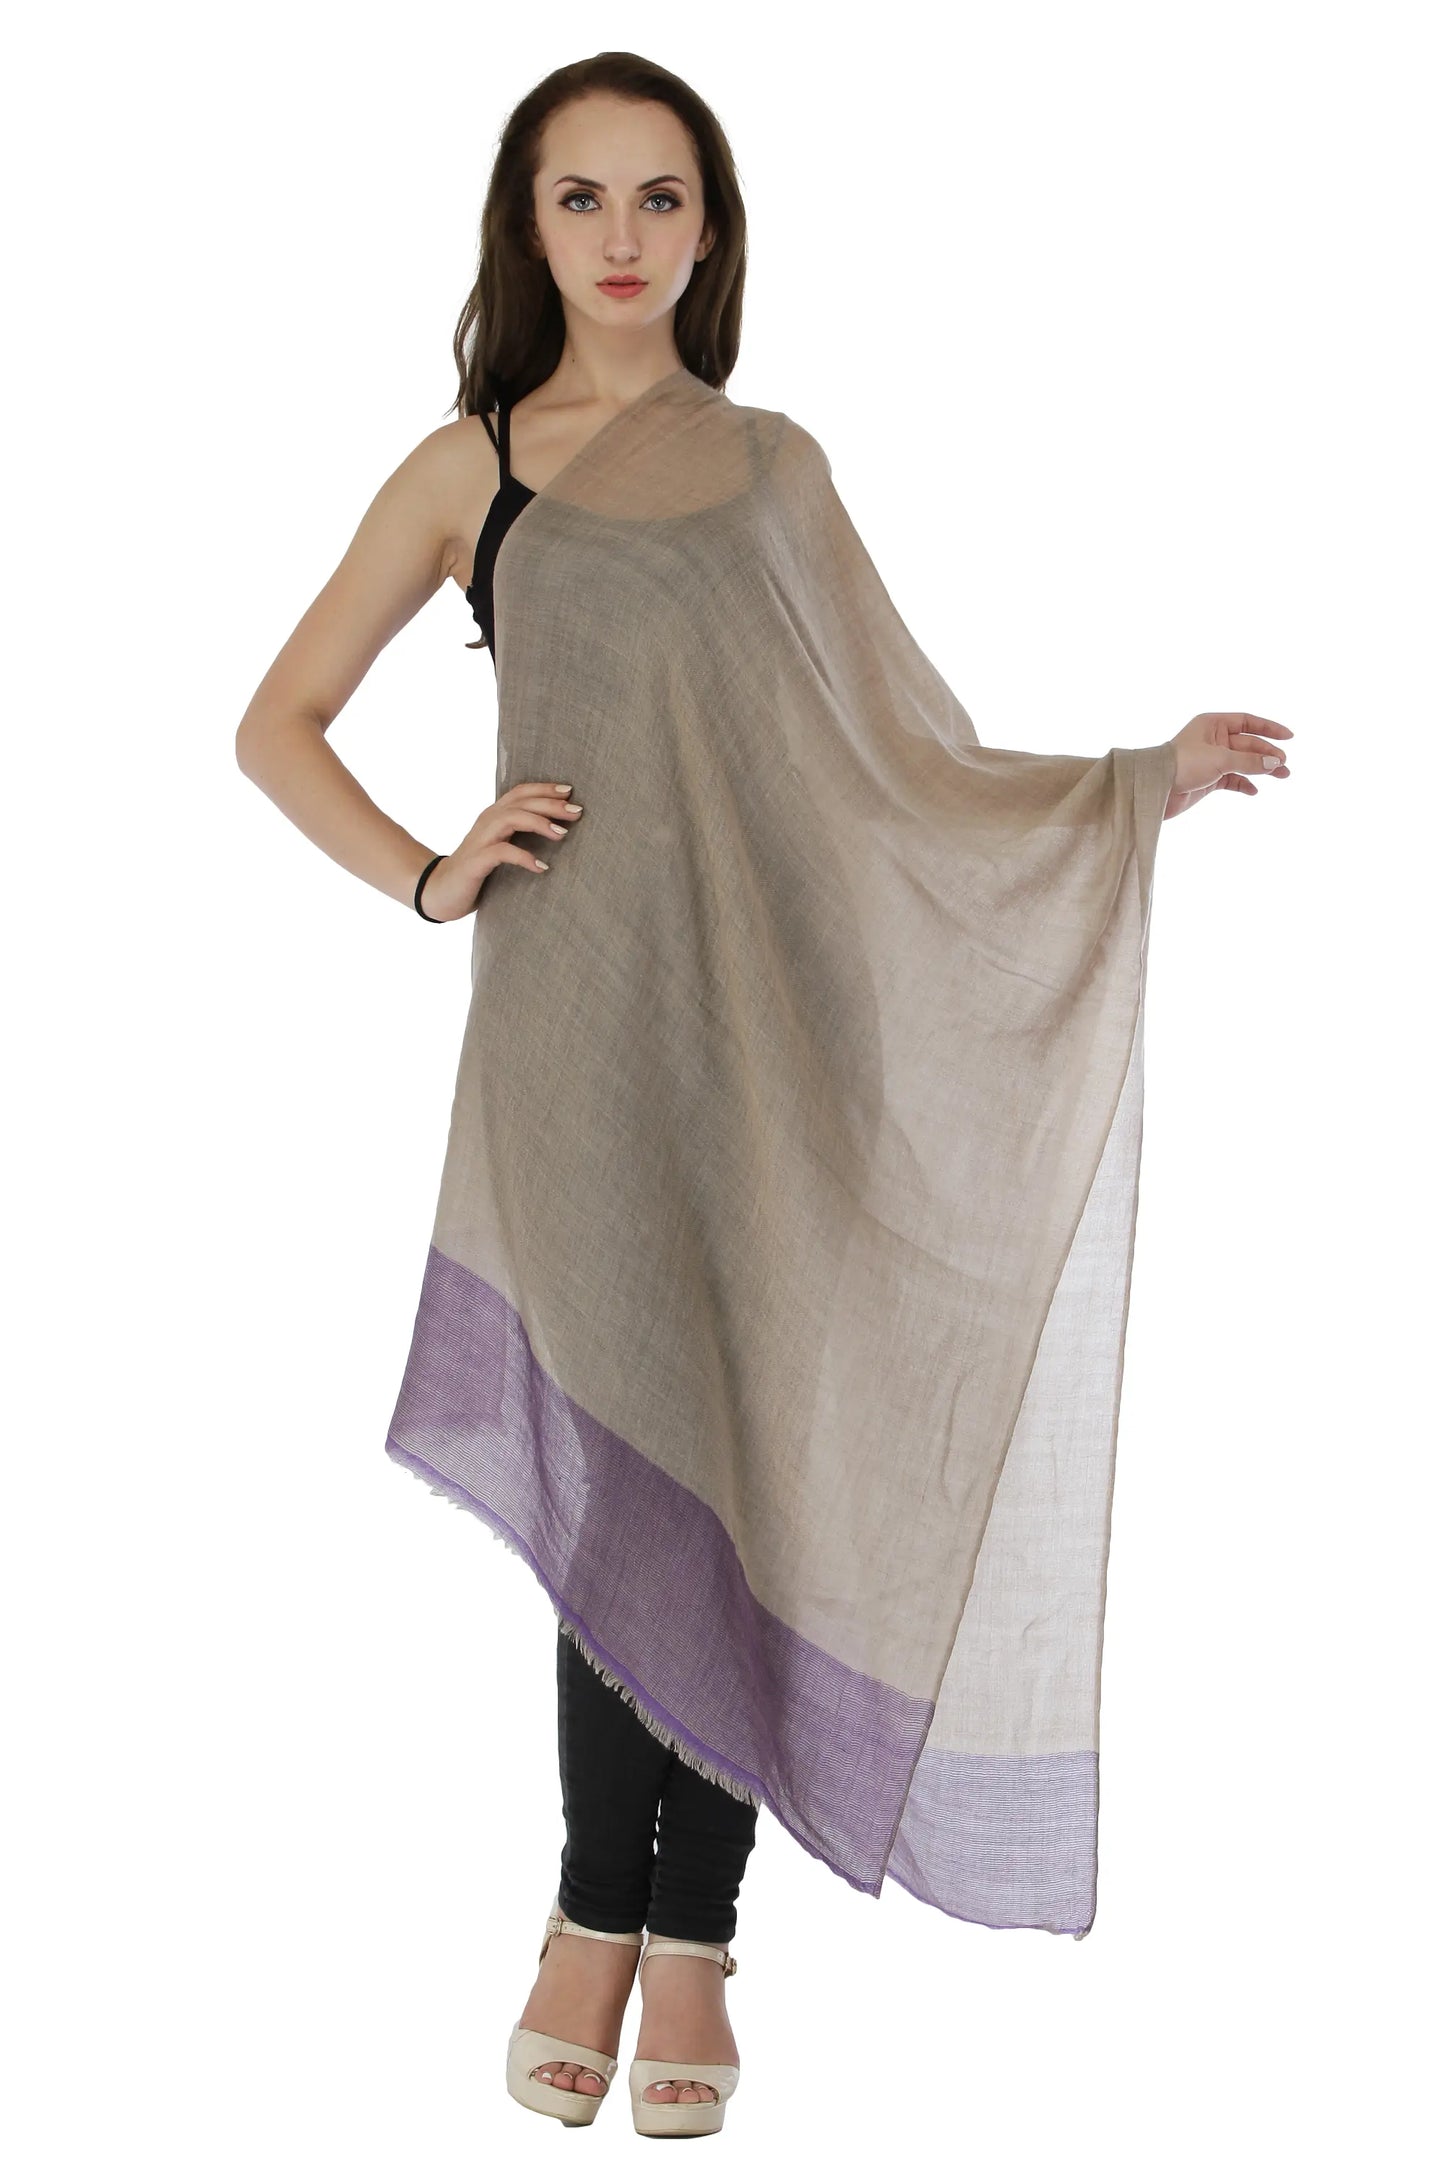 Savannah-Tan Pashmina Woolen Stole With Contrast Purple Broad Border From Nepal